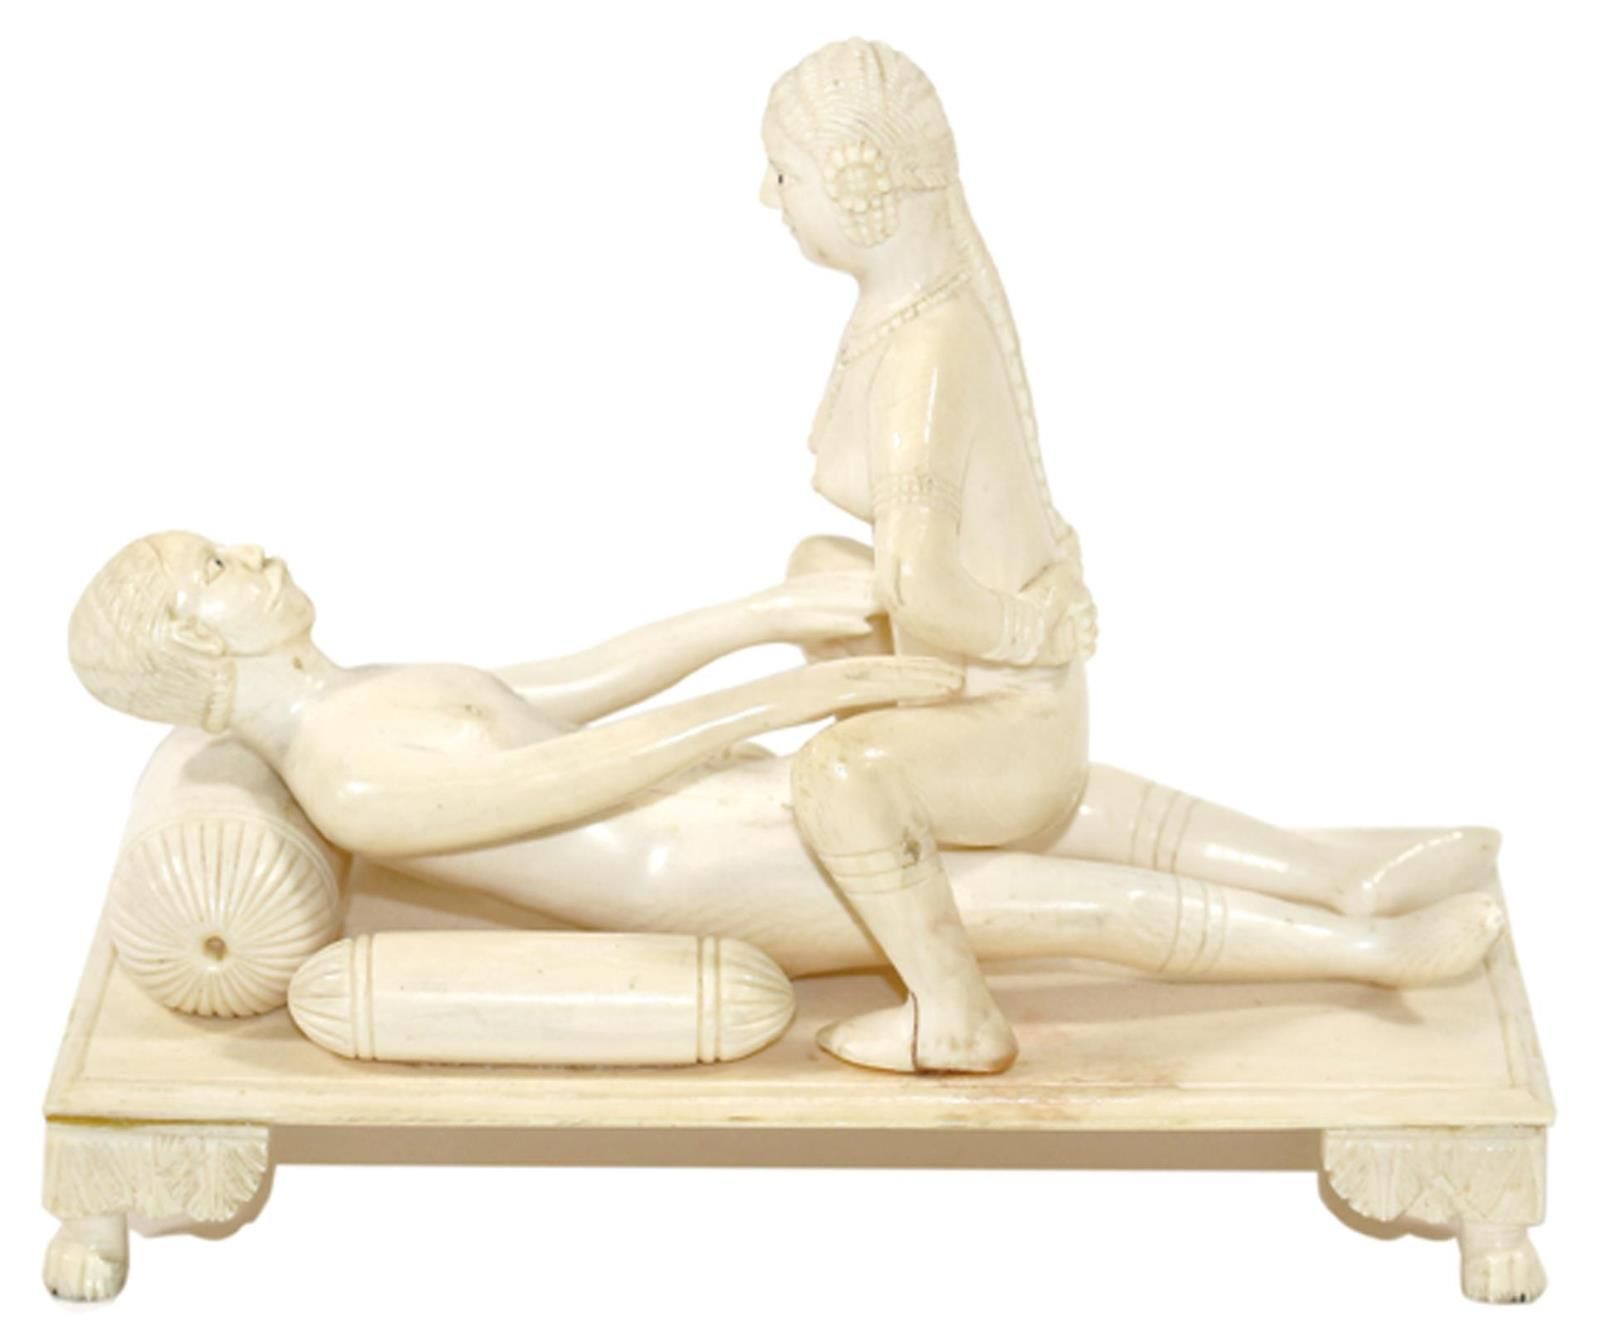 Erotika Elfenbeinschnitzerei. India 19th c. Finely carved ivory lovers in the nu&hellip;